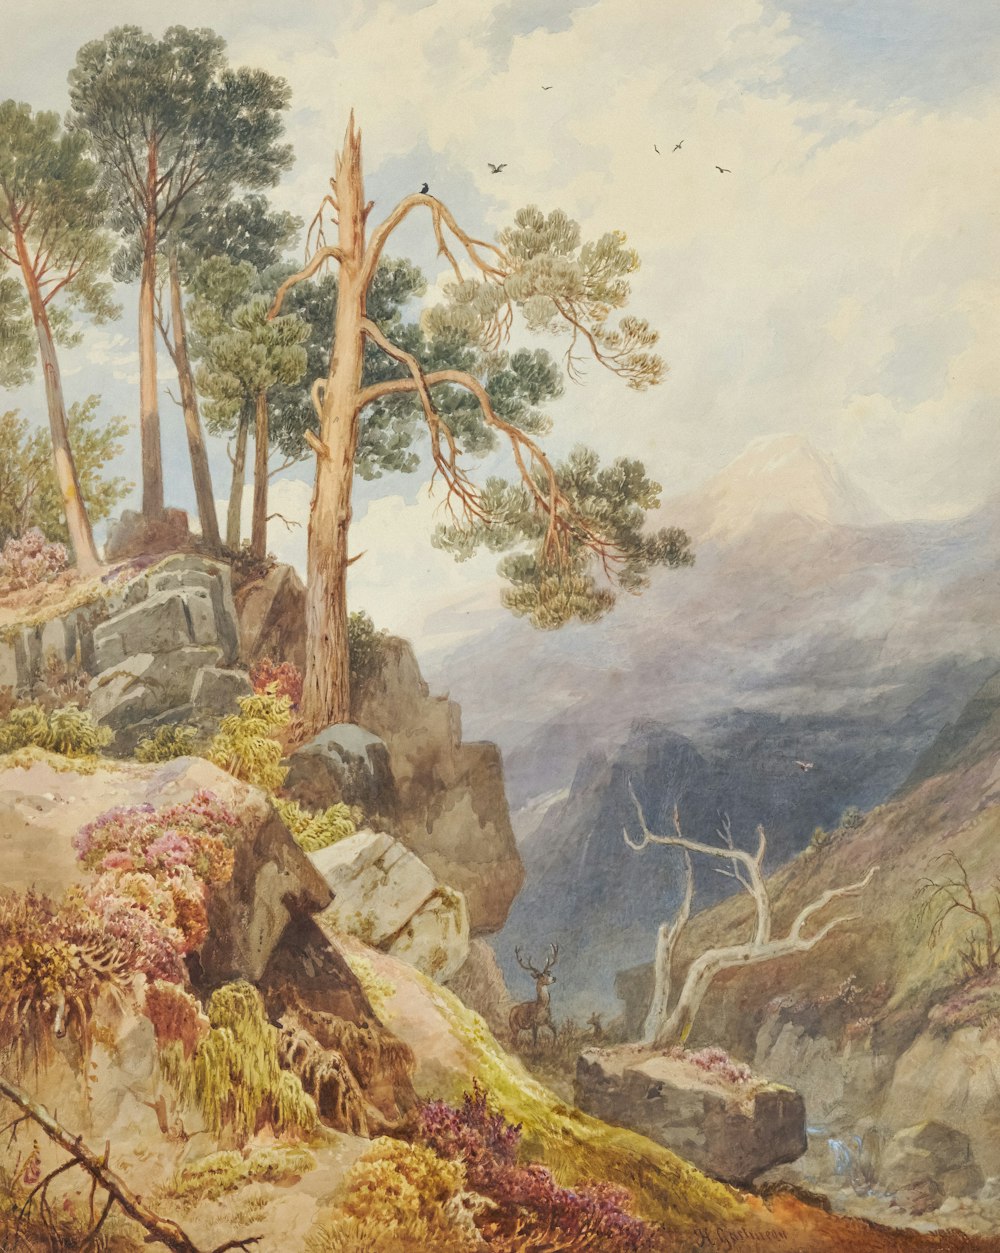 a painting of a mountain scene with trees and rocks